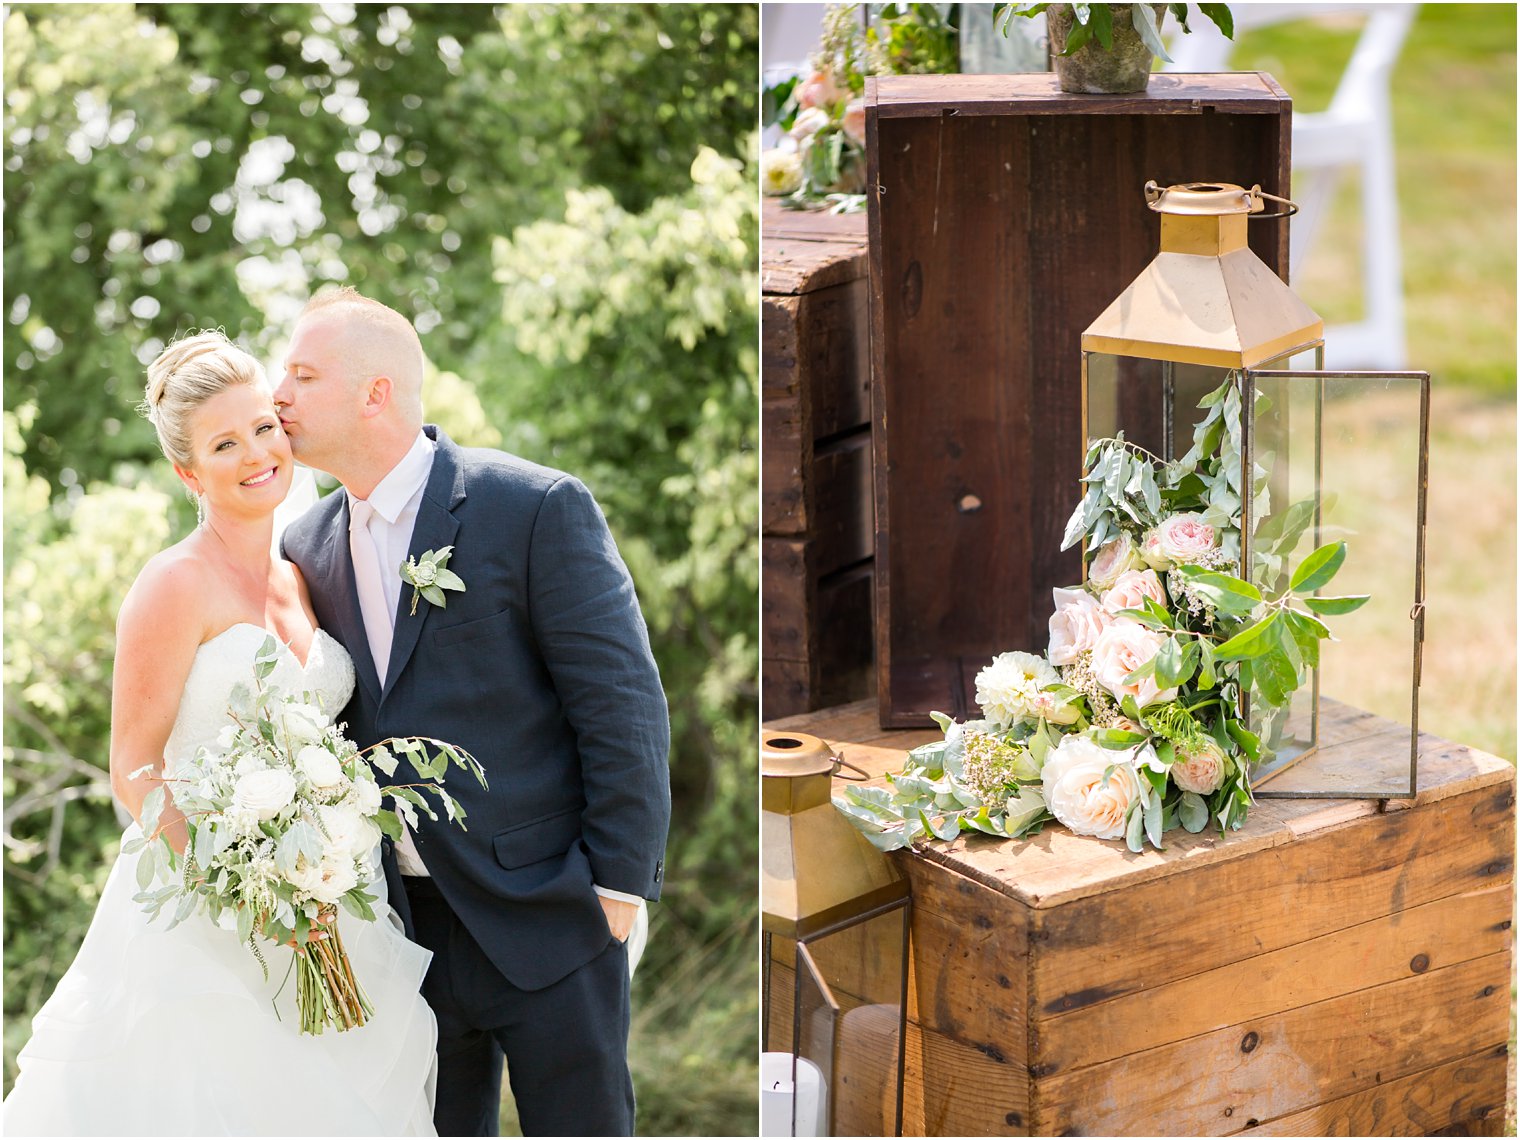 Organic wedding details by Faye and Renee